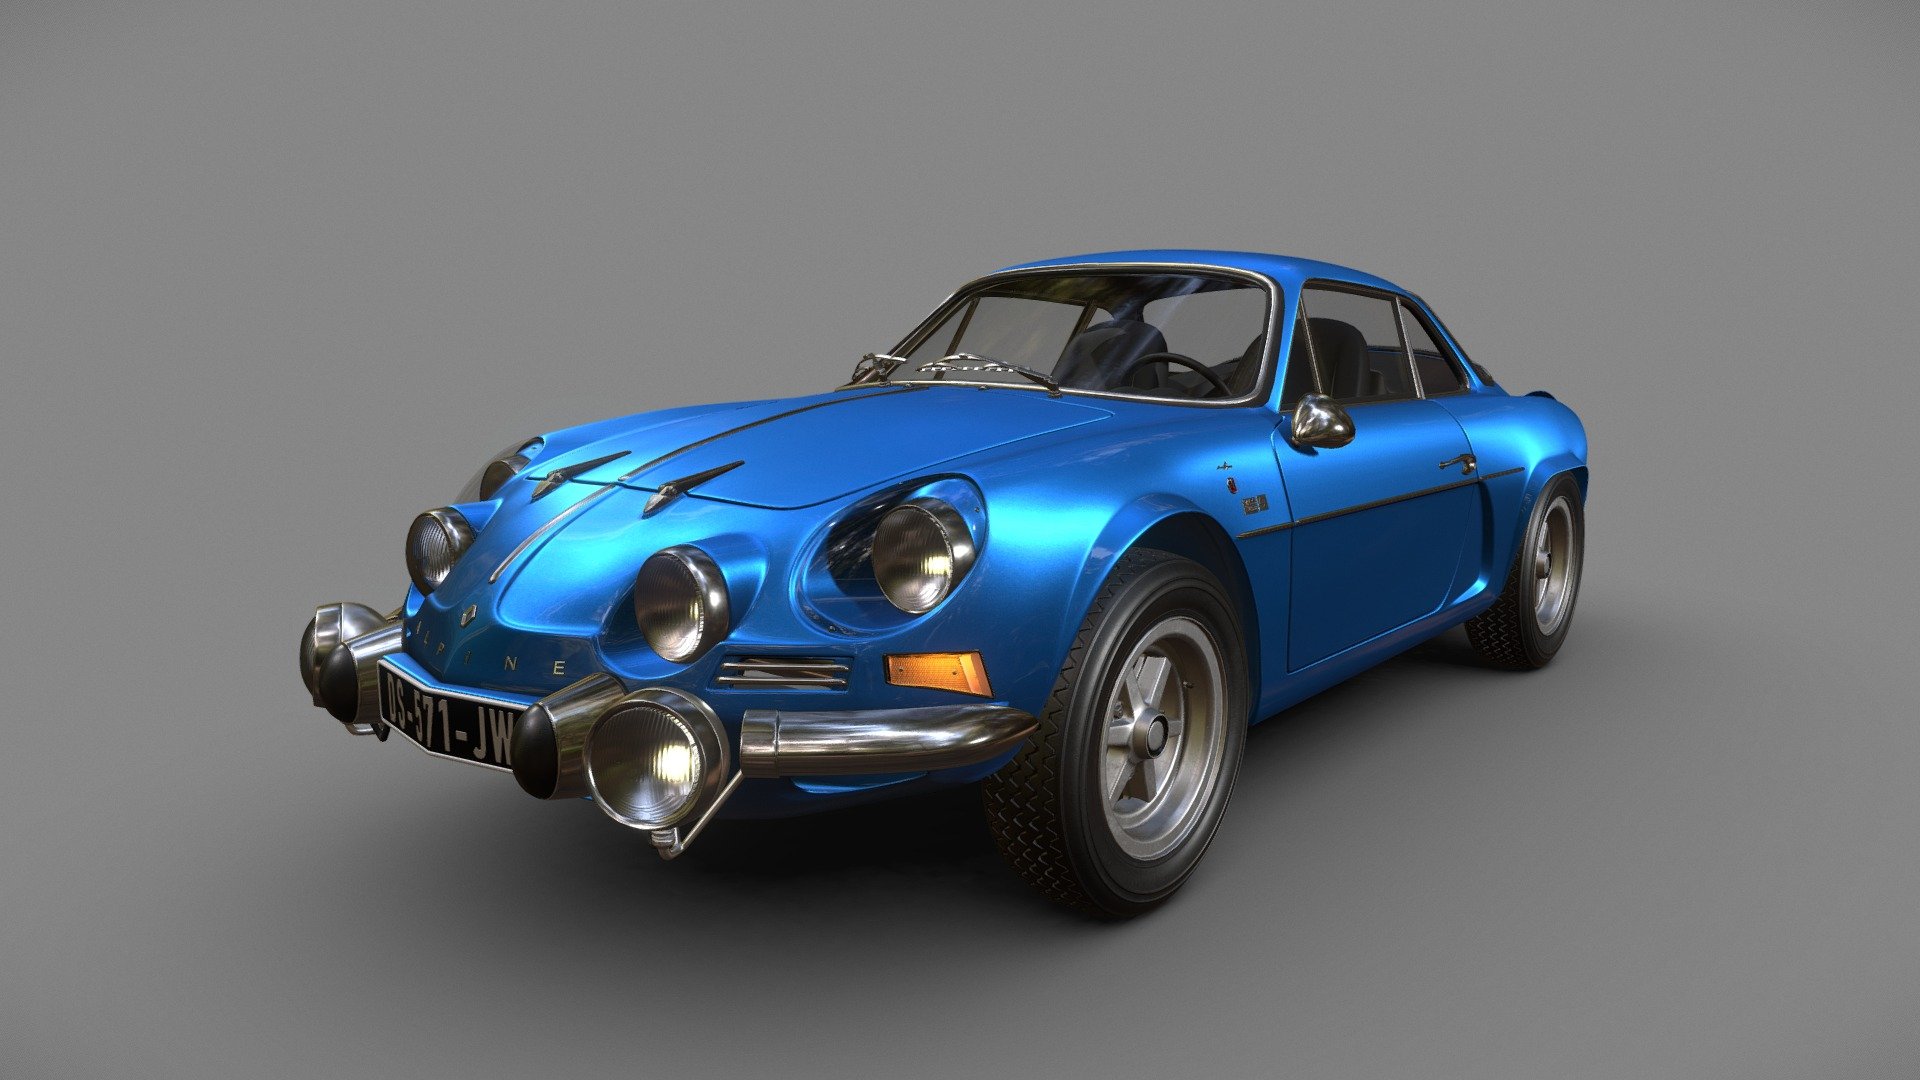 Alpine A110 1600s modeled and shaded/textured in 3DS Max for a school project.

This was my first time modeling a car, it was quite the challenge but i'm happy with the result ! - Renault Alpine A110 1600s - 3D model by Leonardo (@bobododo) 3d model